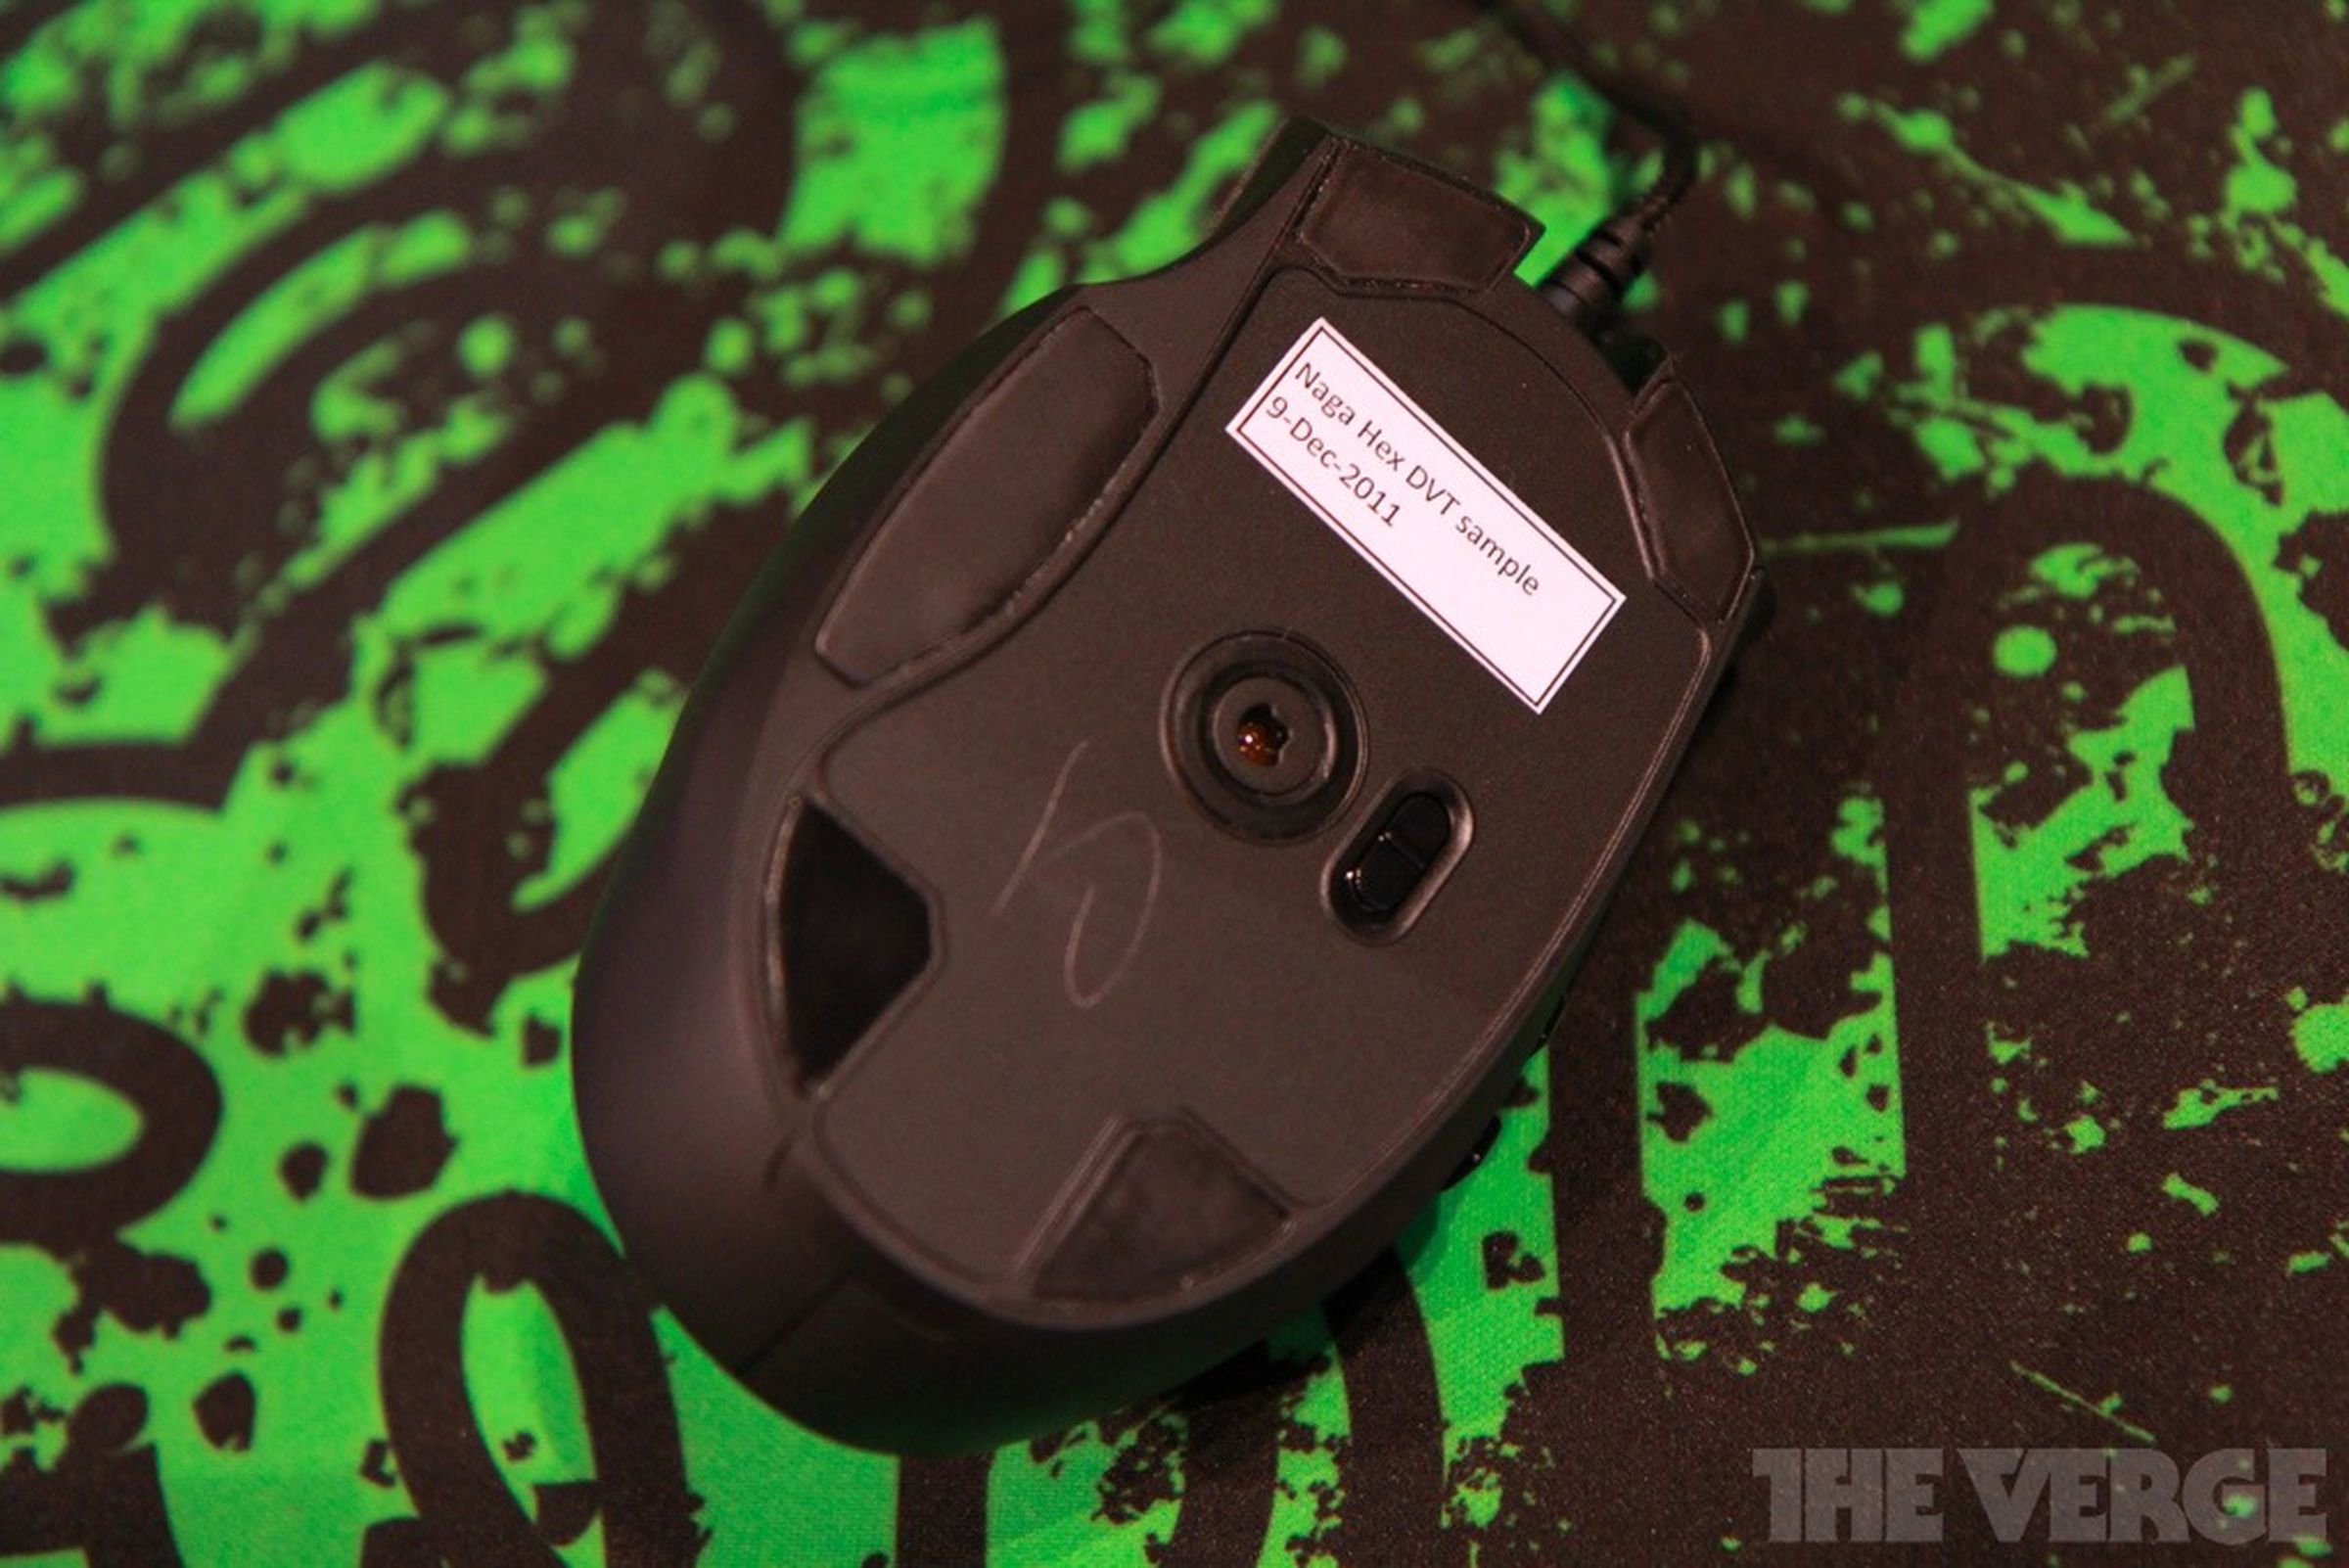 Razer Naga Hex gaming mouse hands-on pictures